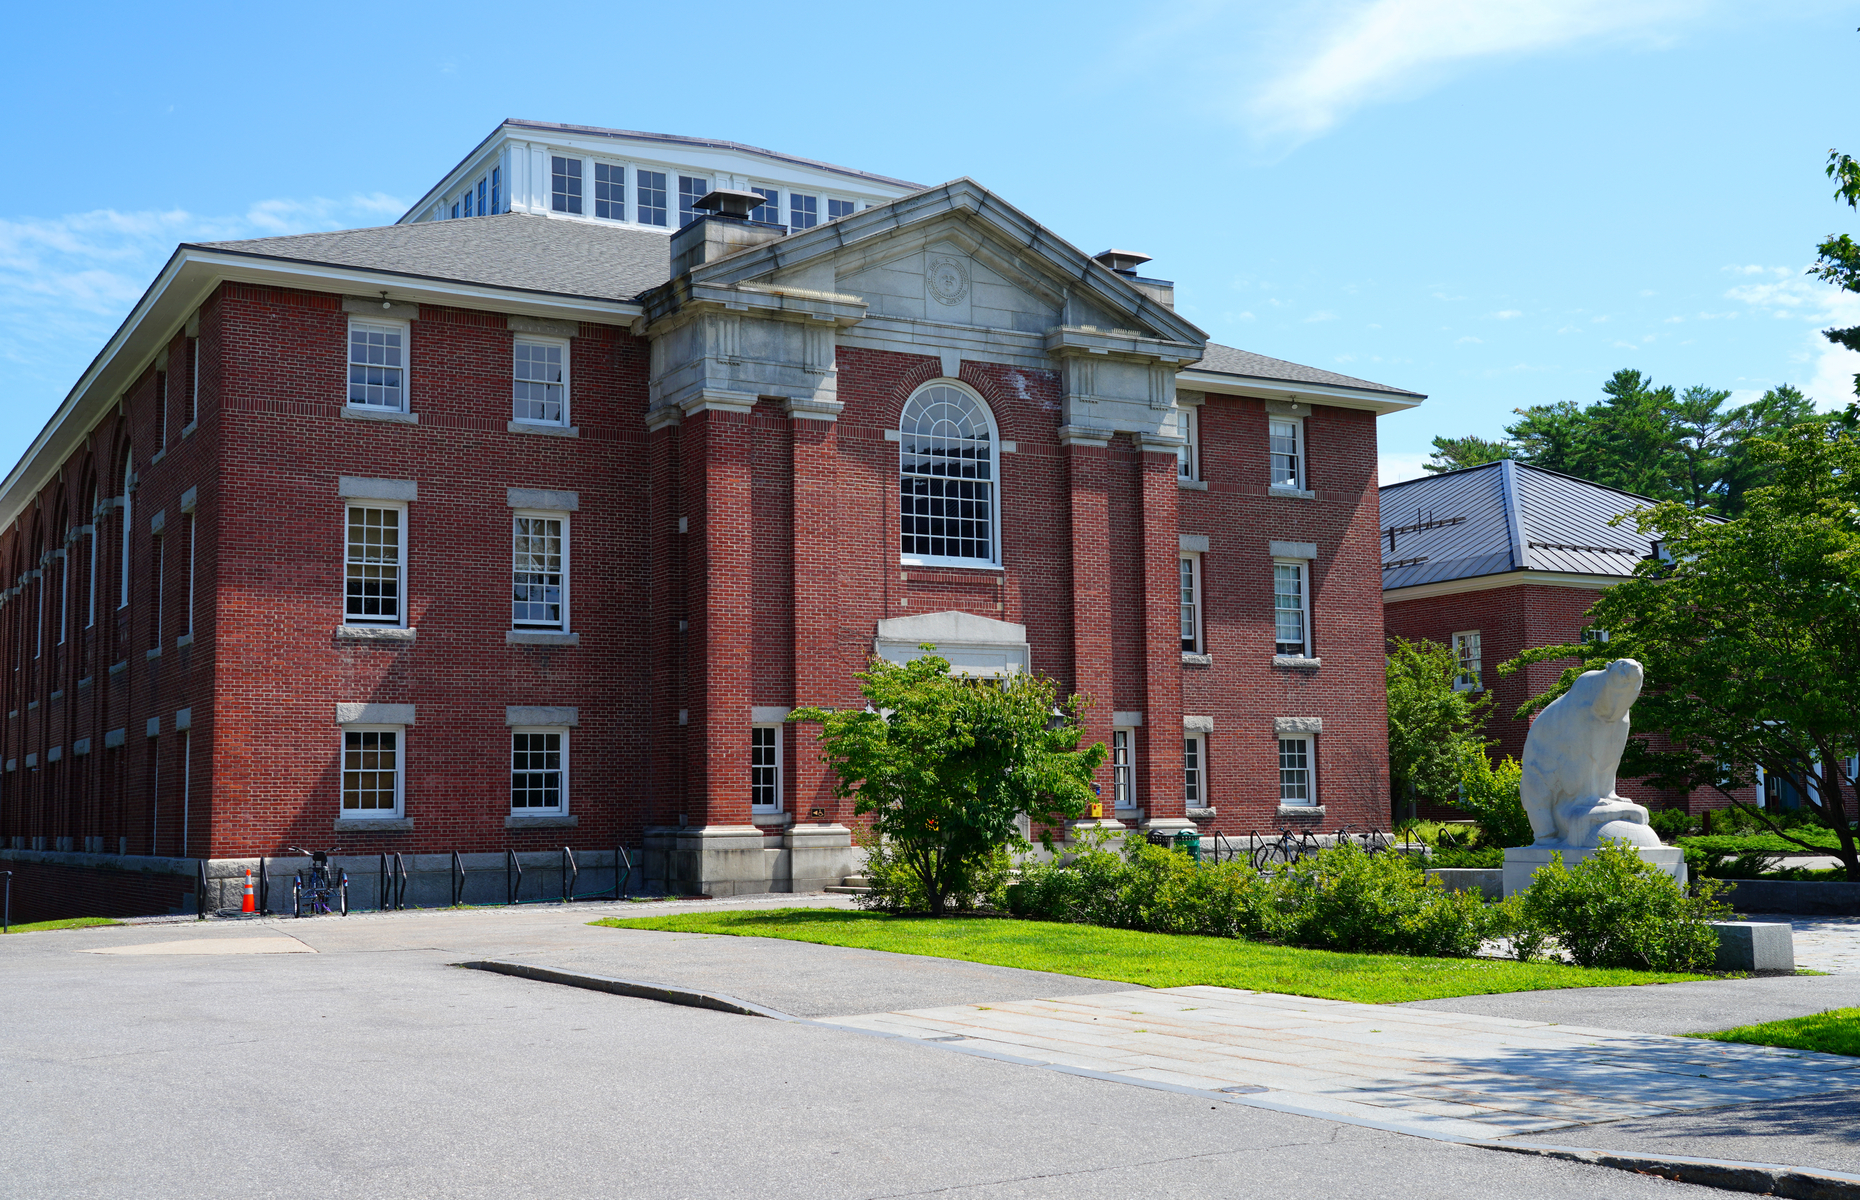 <p>This <a href="https://www.bowdoin.edu/" rel="noreferrer noopener">small liberal arts college</a> in Maine has some beautiful buildings on campus, including the Peary-MacMillan Arctic Museum and the Bowdoin College Museum of Art.</p>